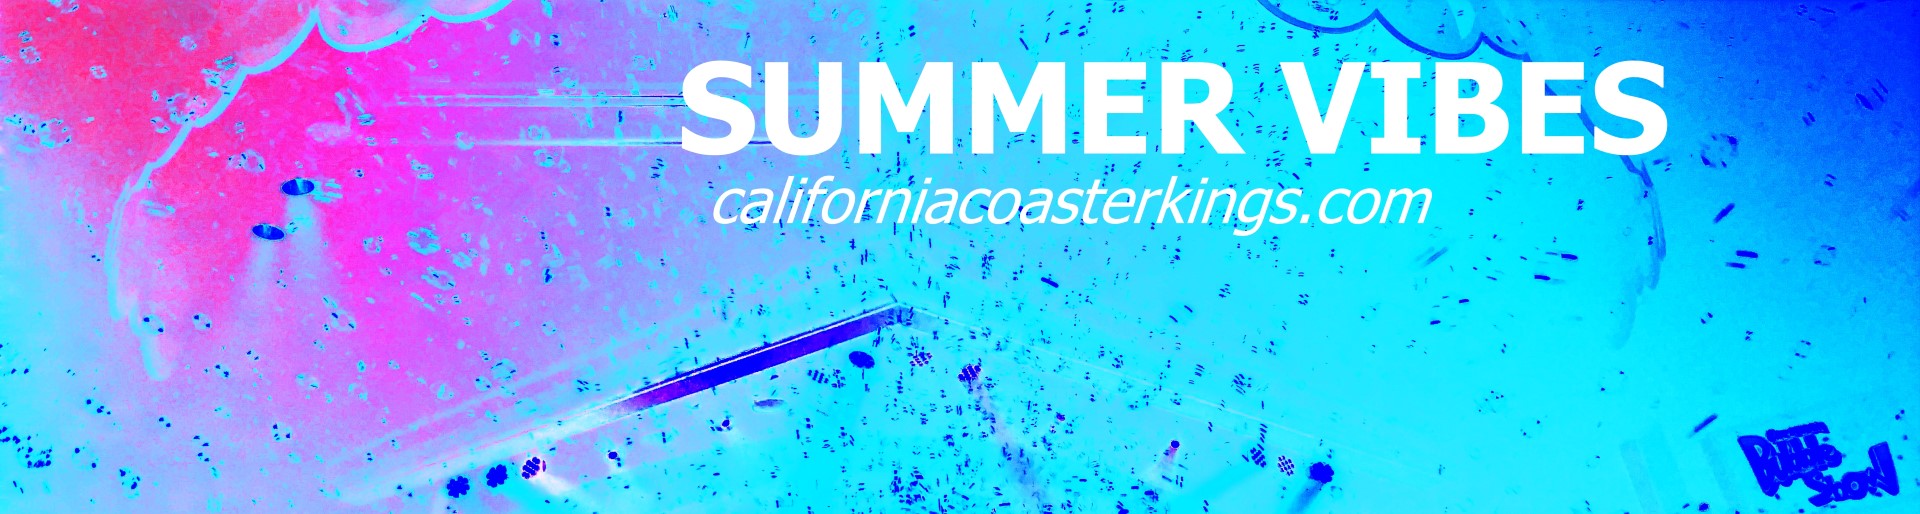 Summer Vibes Banner001 (Large)